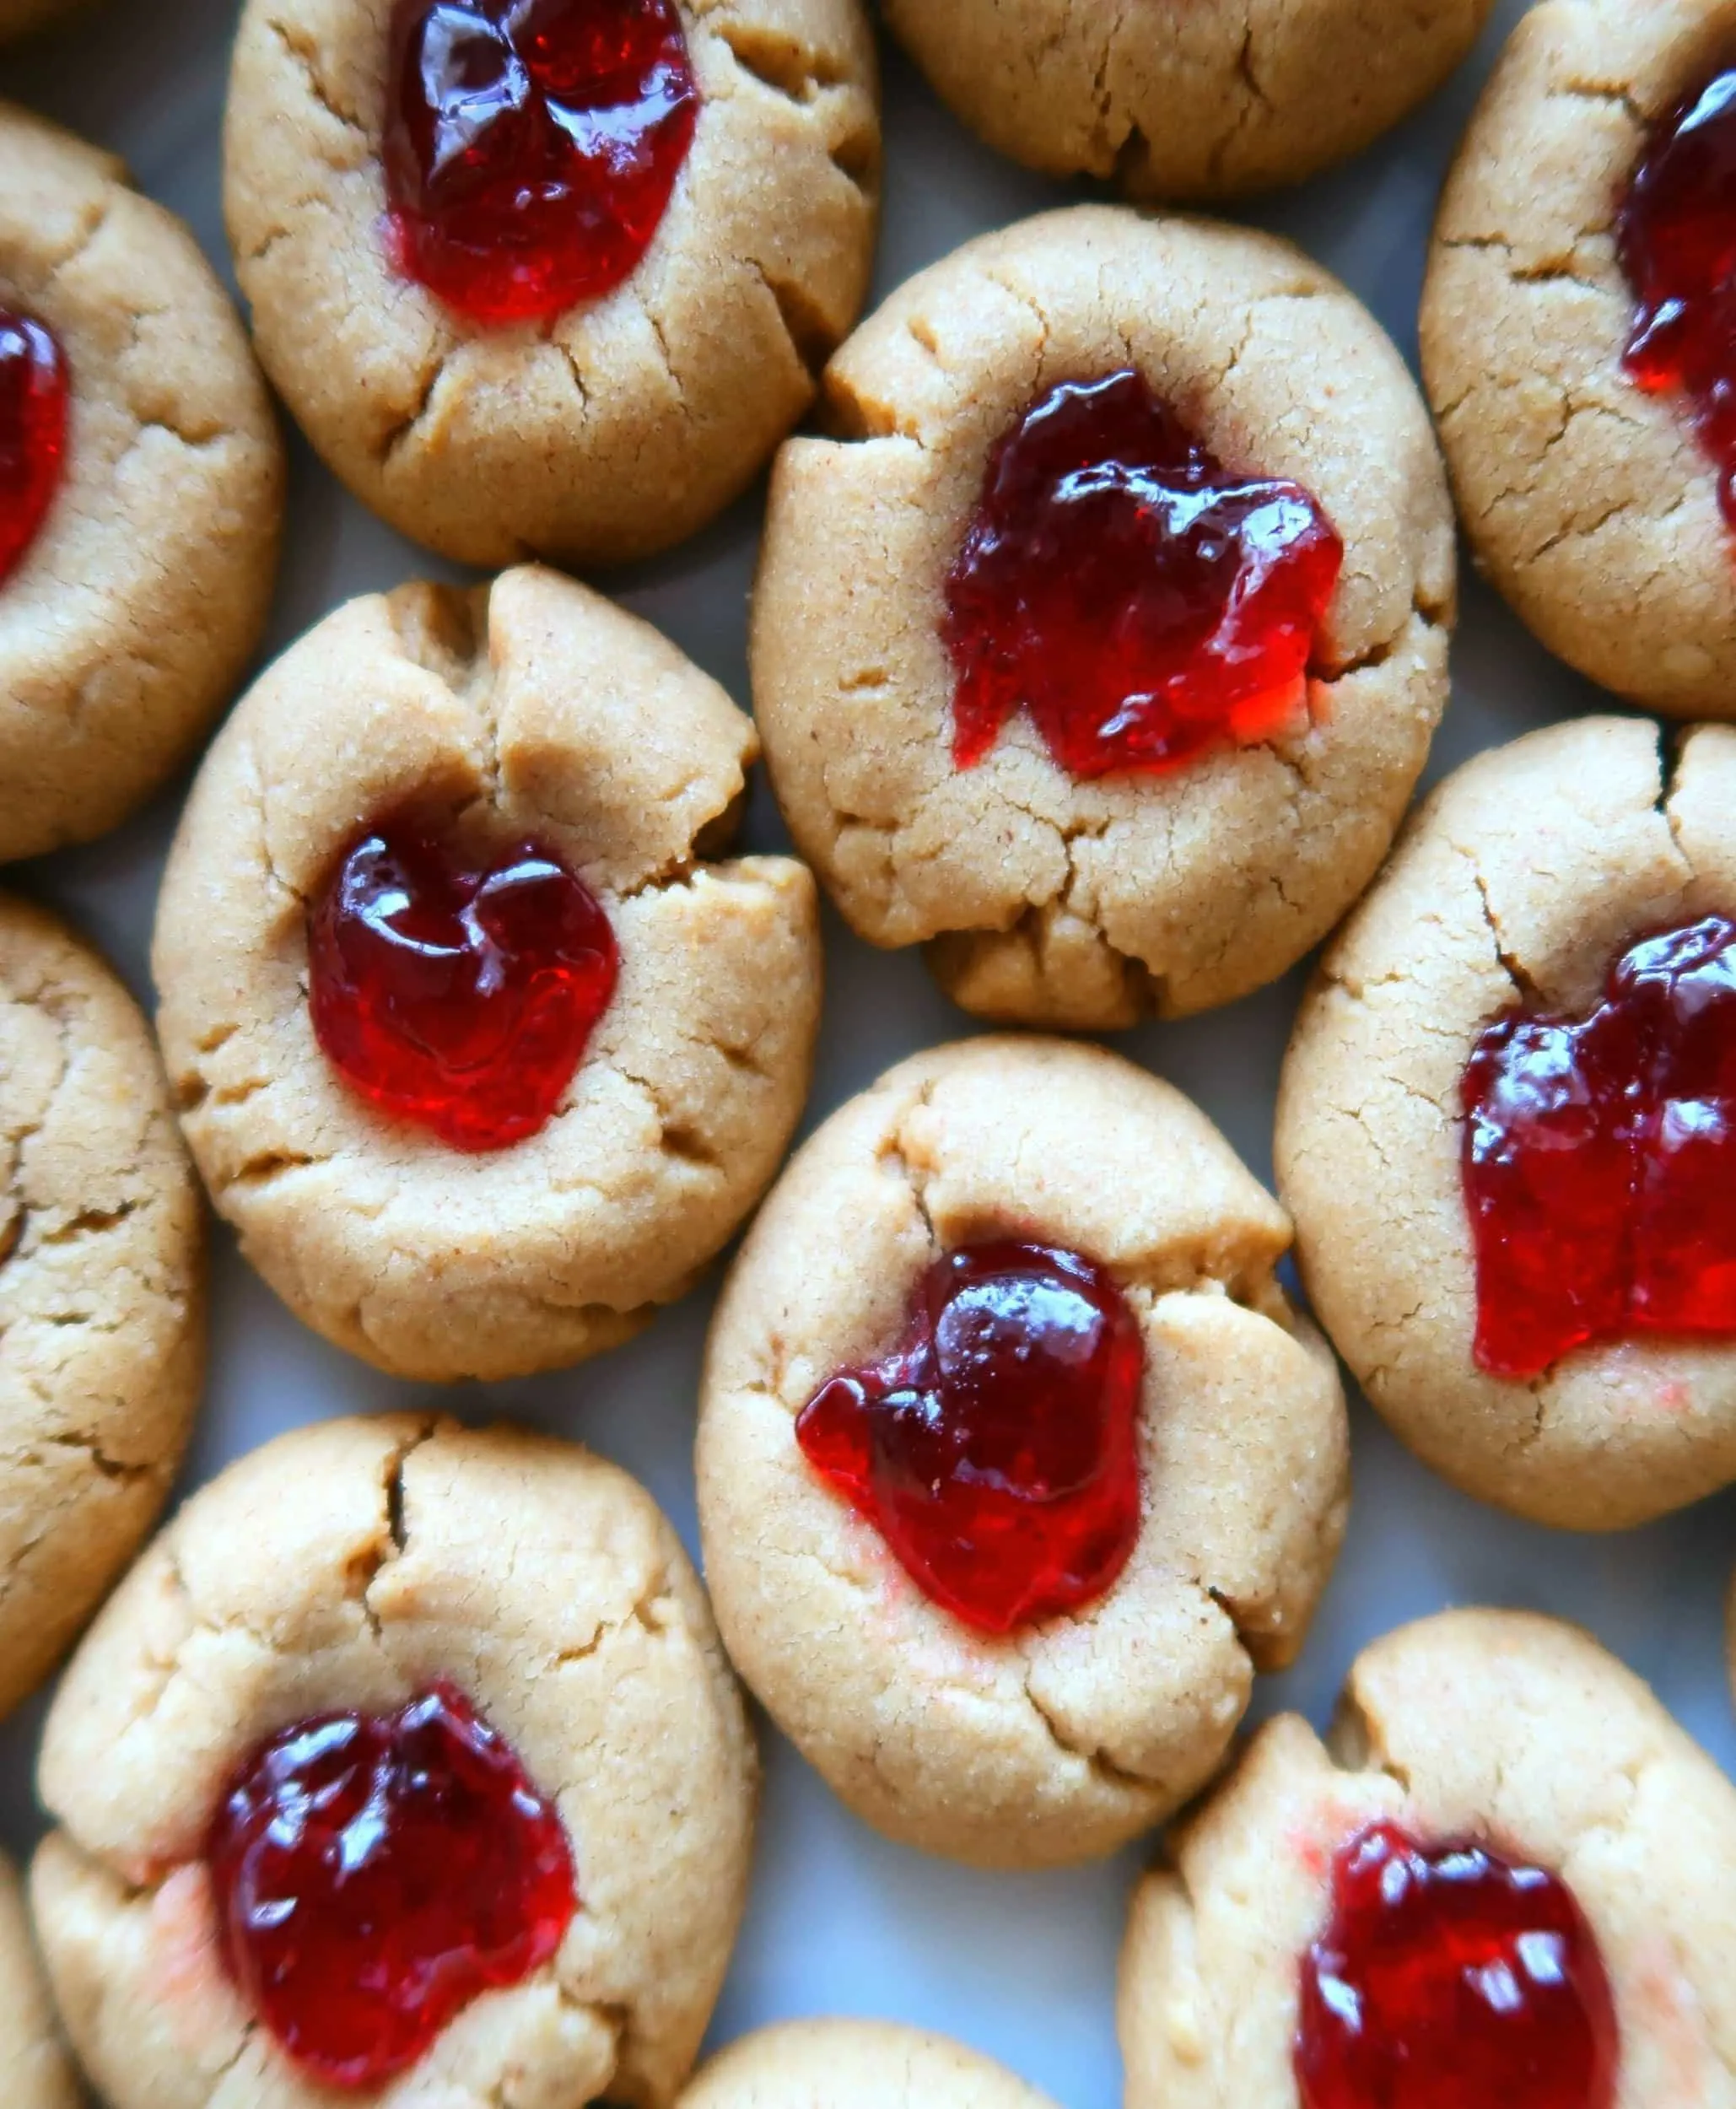 Peanut butter thumbprint cookies filled with jelly.